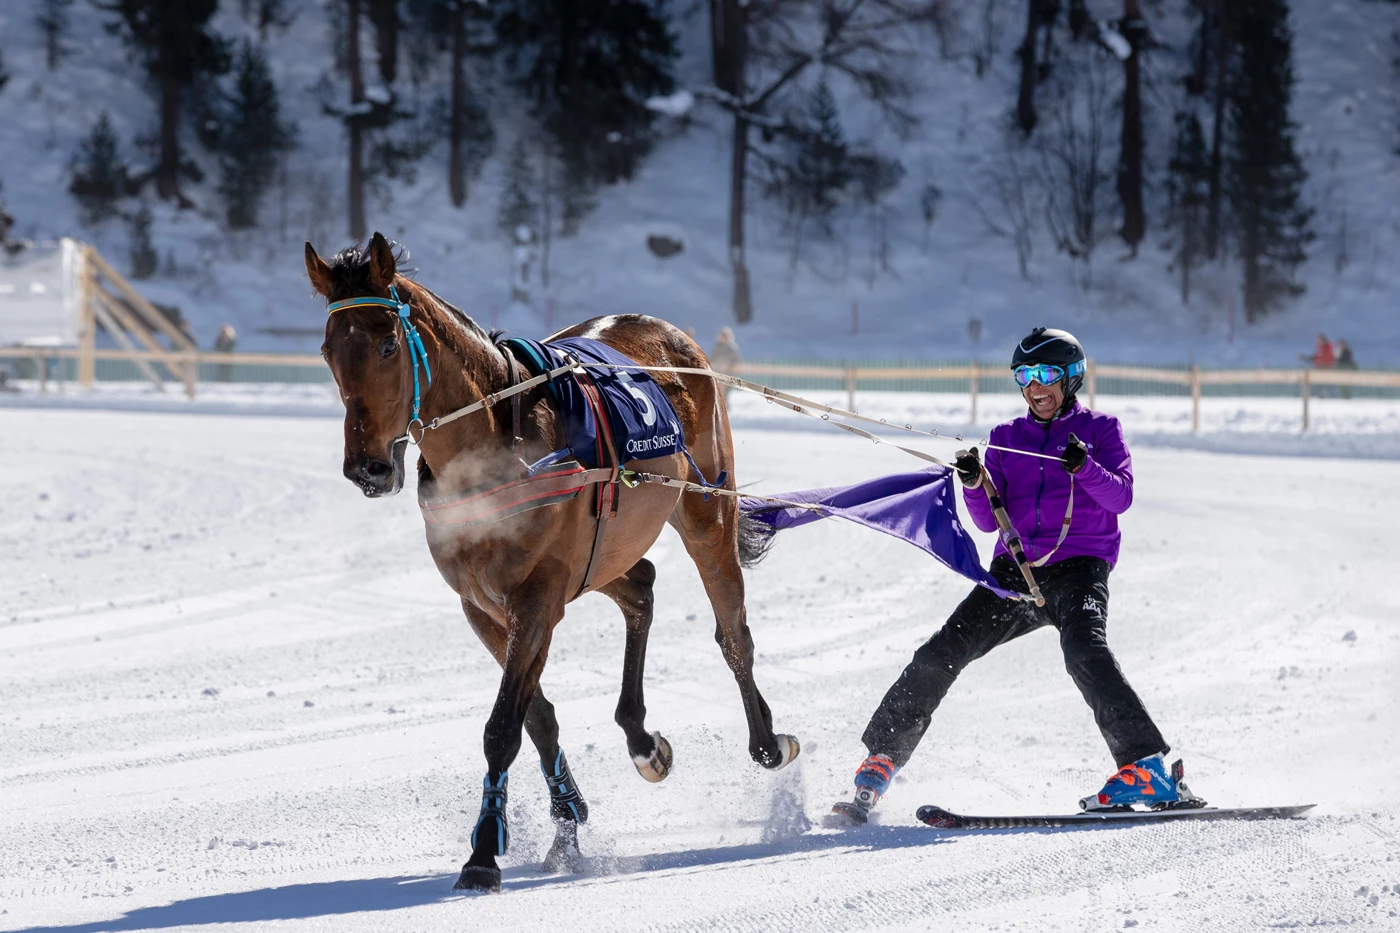 A person on skis being pulled by a horse through the snow